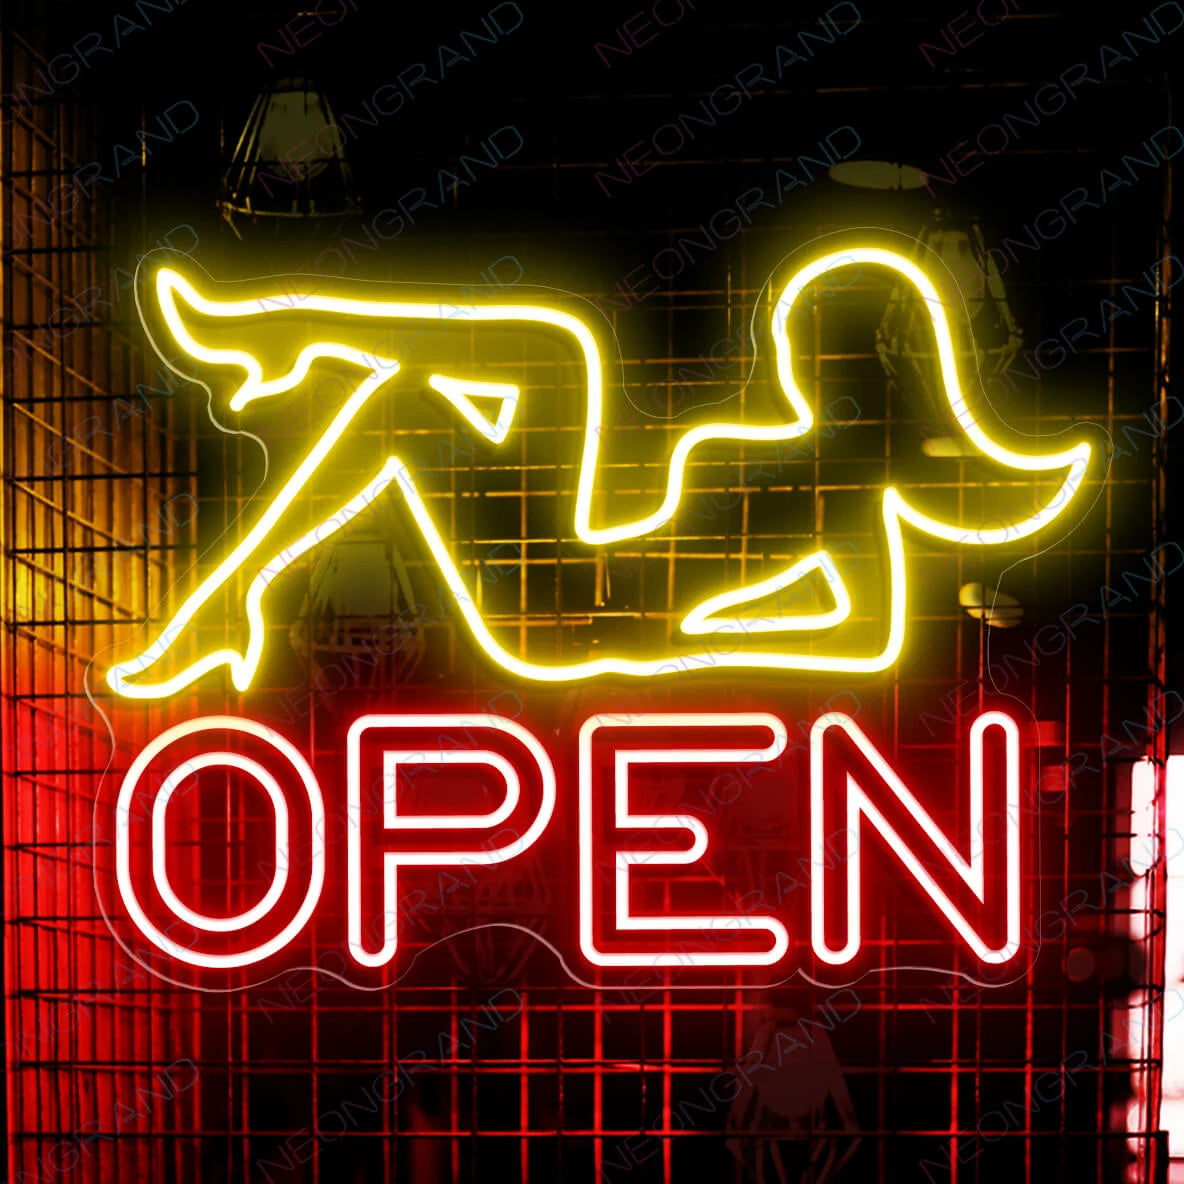 Open & Closed Led Sign - Store Neon Business Bar Shop Closed Light